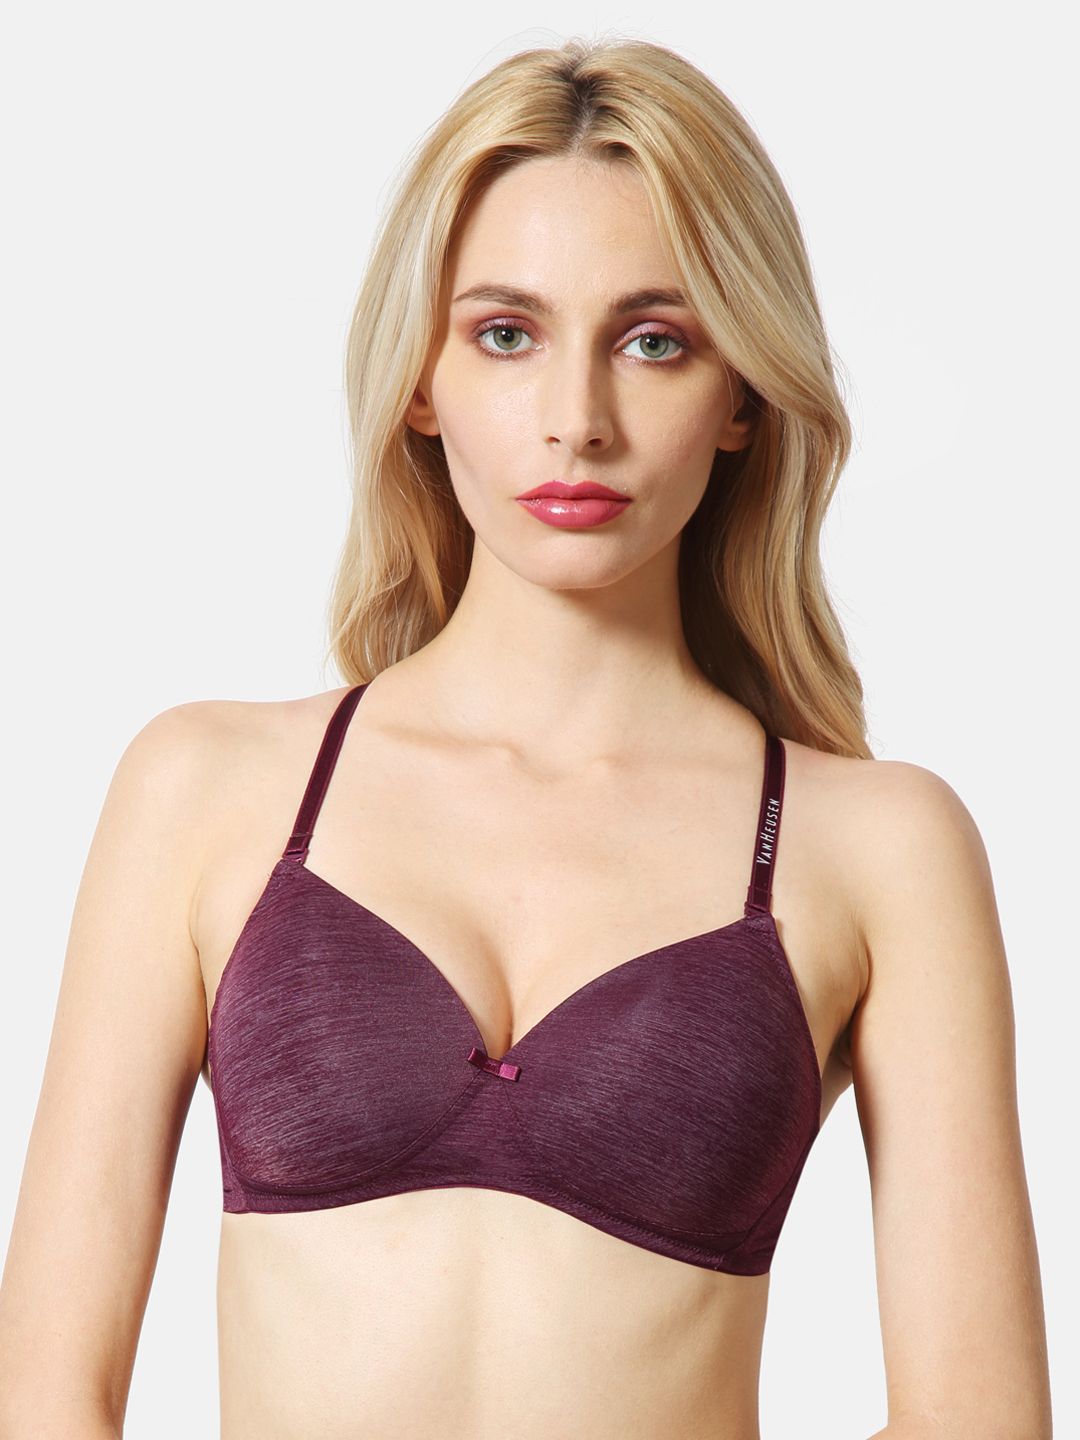 Van Heusen Purple Solid Non-Wired Lightly Padded T-shirt Bra ILIBRALXSWW3022001 Price in India